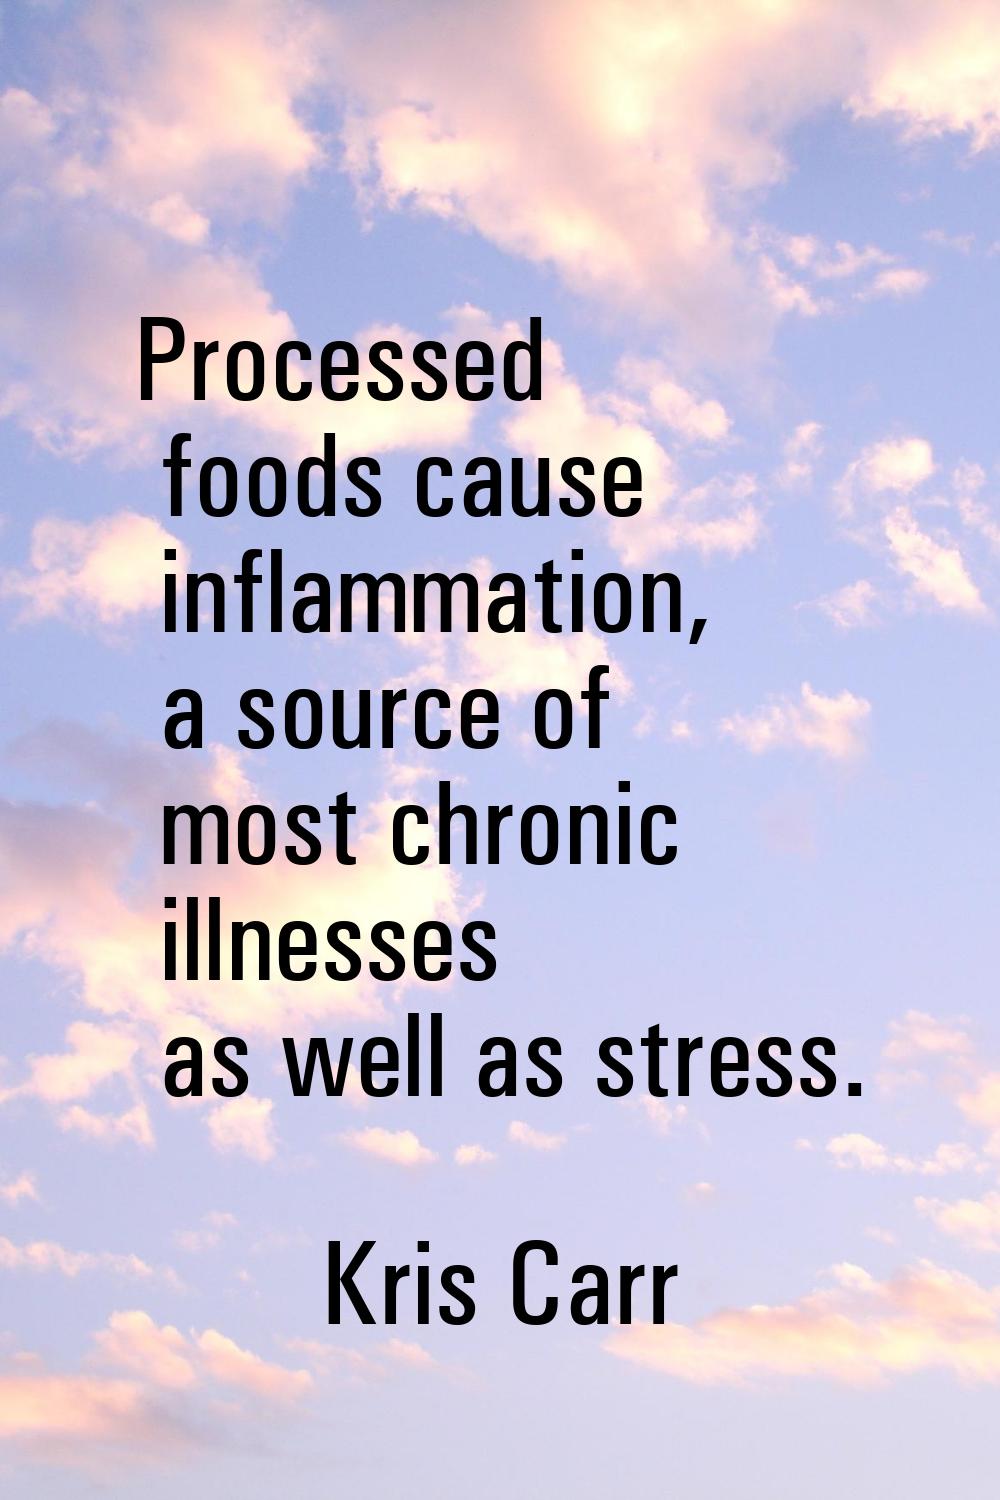 Processed foods cause inflammation, a source of most chronic illnesses as well as stress.